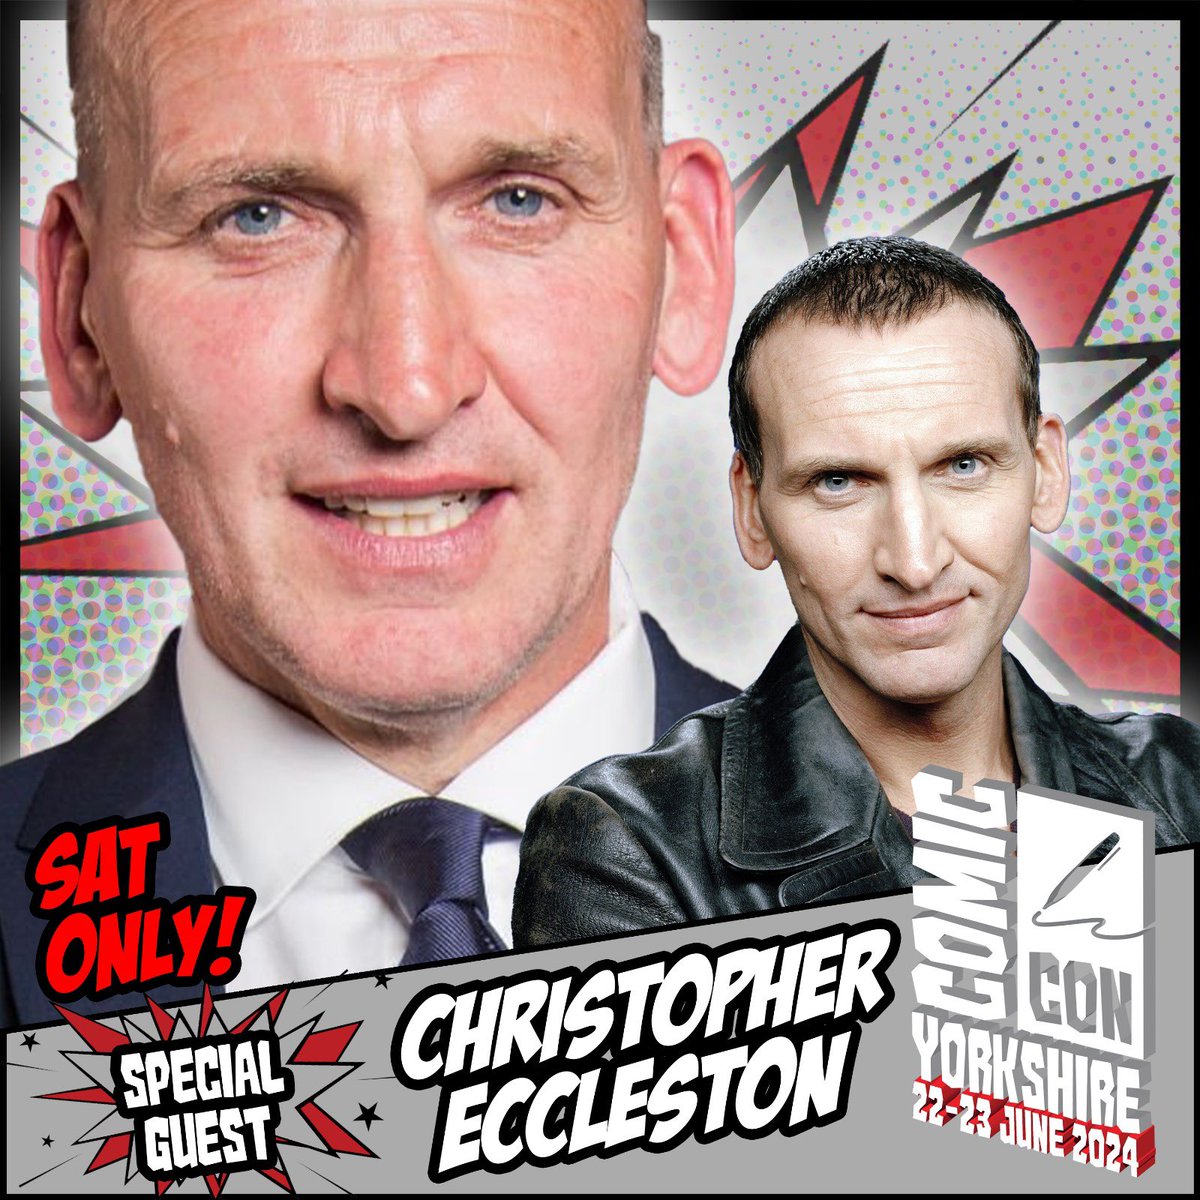 Comic Con Yorkshire welcomes Chris Eccleston, known for projects such Doctor Who, Thor: The Dark World, G.I Joe: The Rise of the Cobra. Appearing Saturday Only! Tickets: comicconventionyorkshire.co.uk